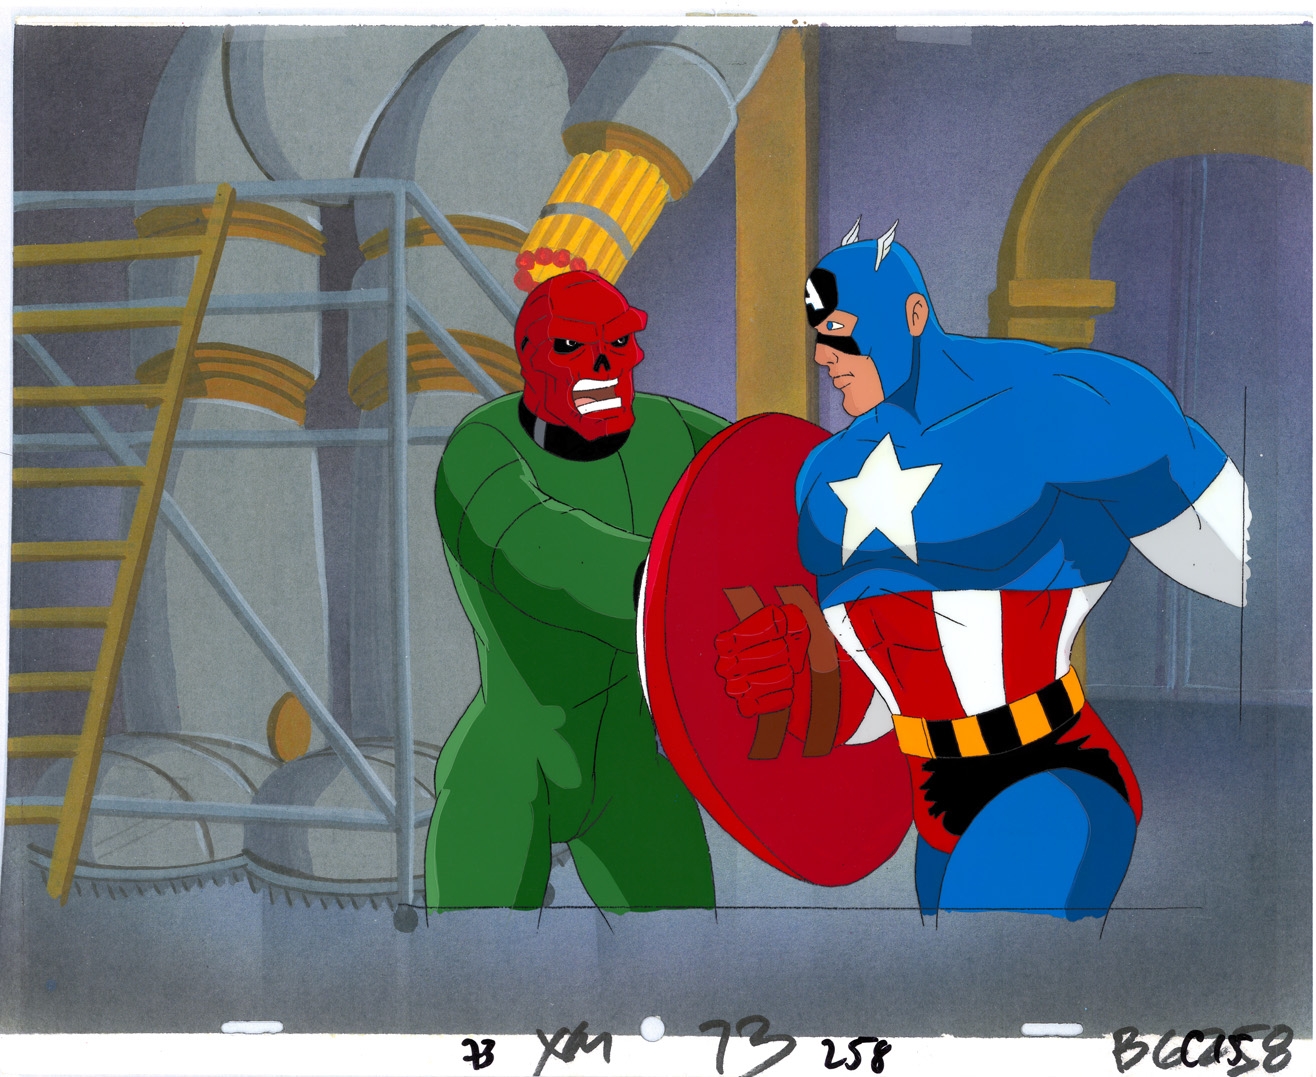 CAPTAIN AMERICA vs. RED SKULL from THE X-MEN Animated Series!, in Brendon  and Brian Fraim's Our Animation Cel Collection Comic Art Gallery Room